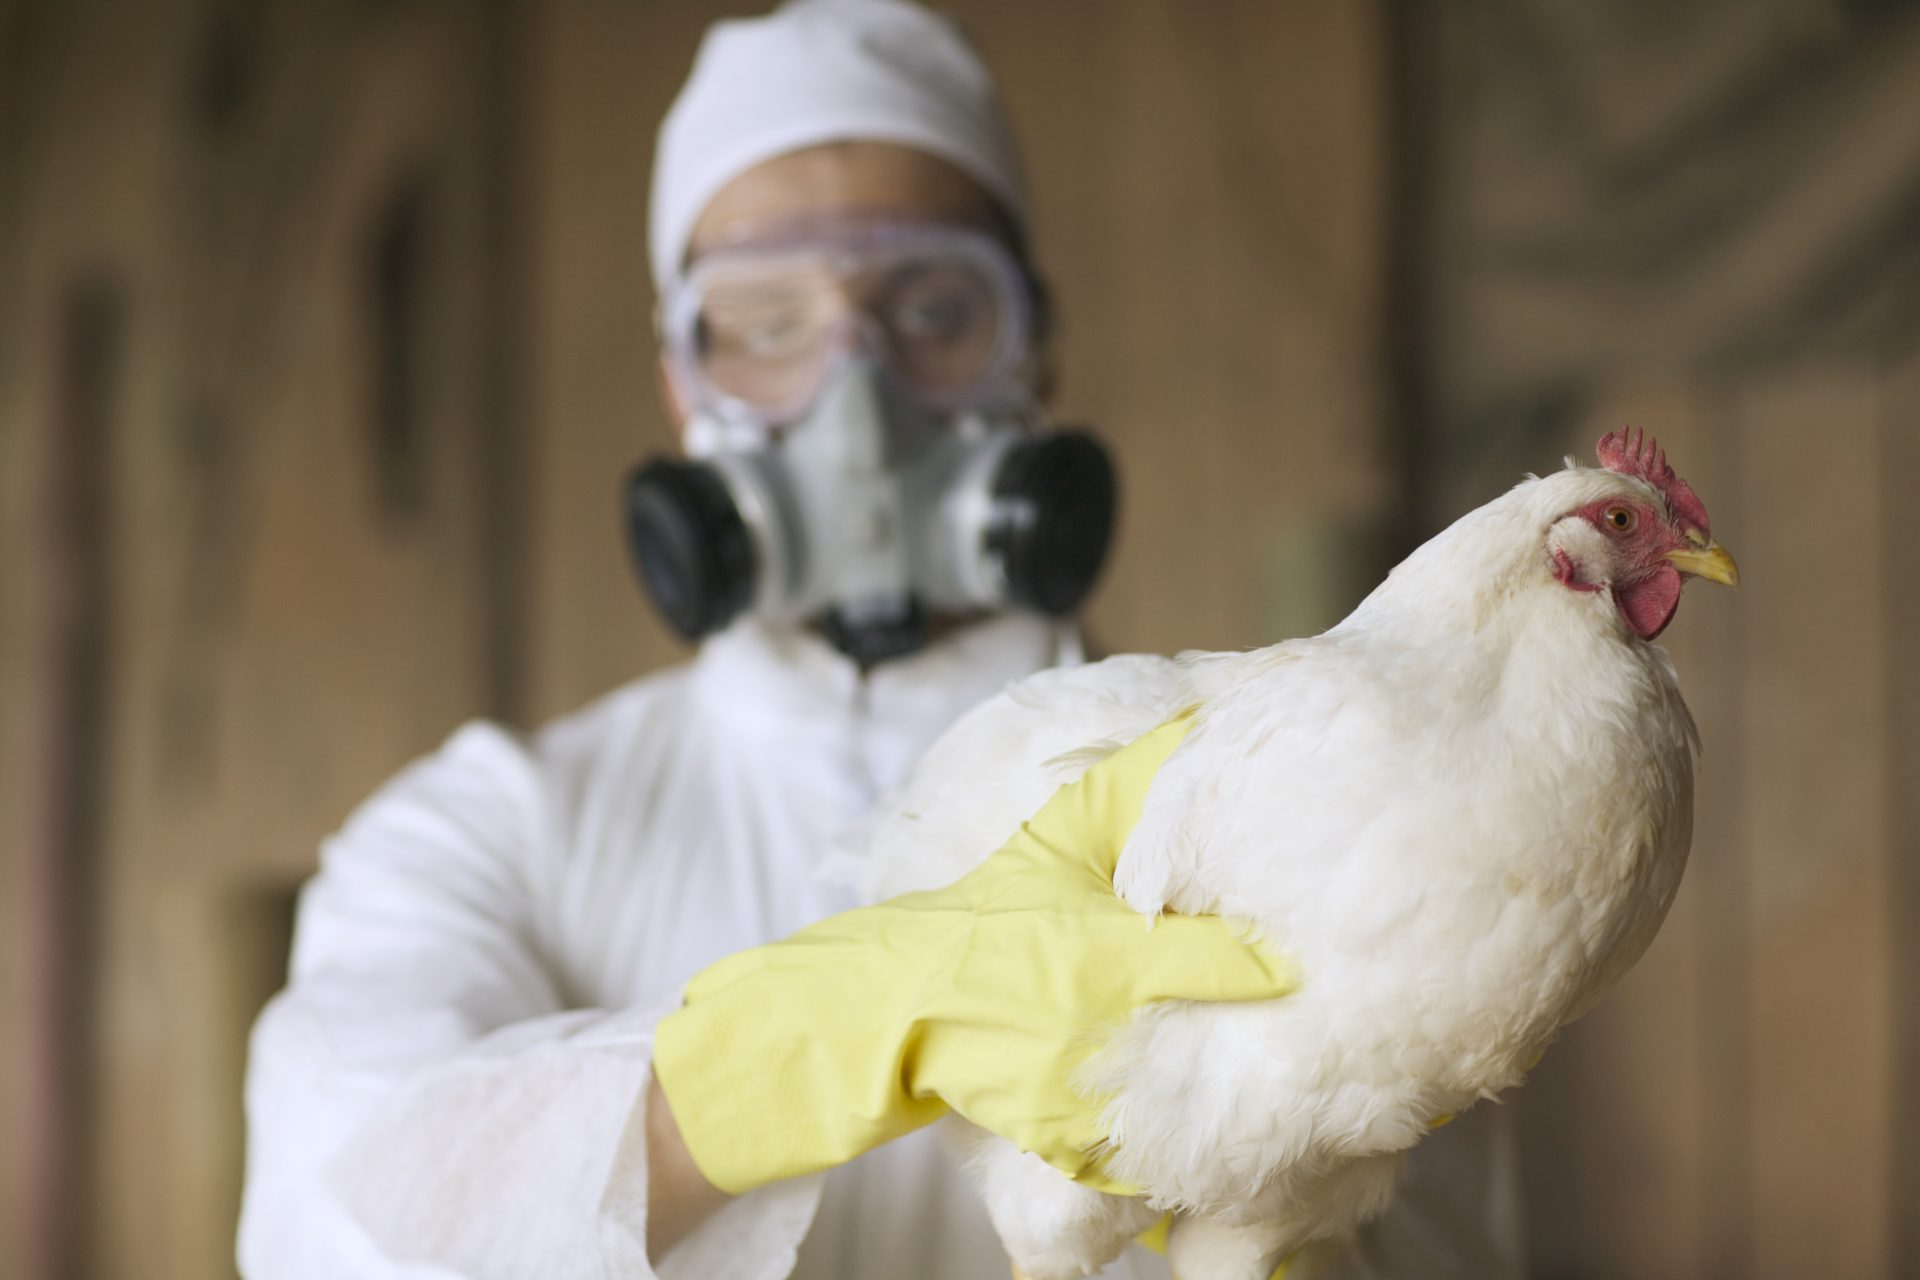 Bird flu kills millions of animals and has now reached humans